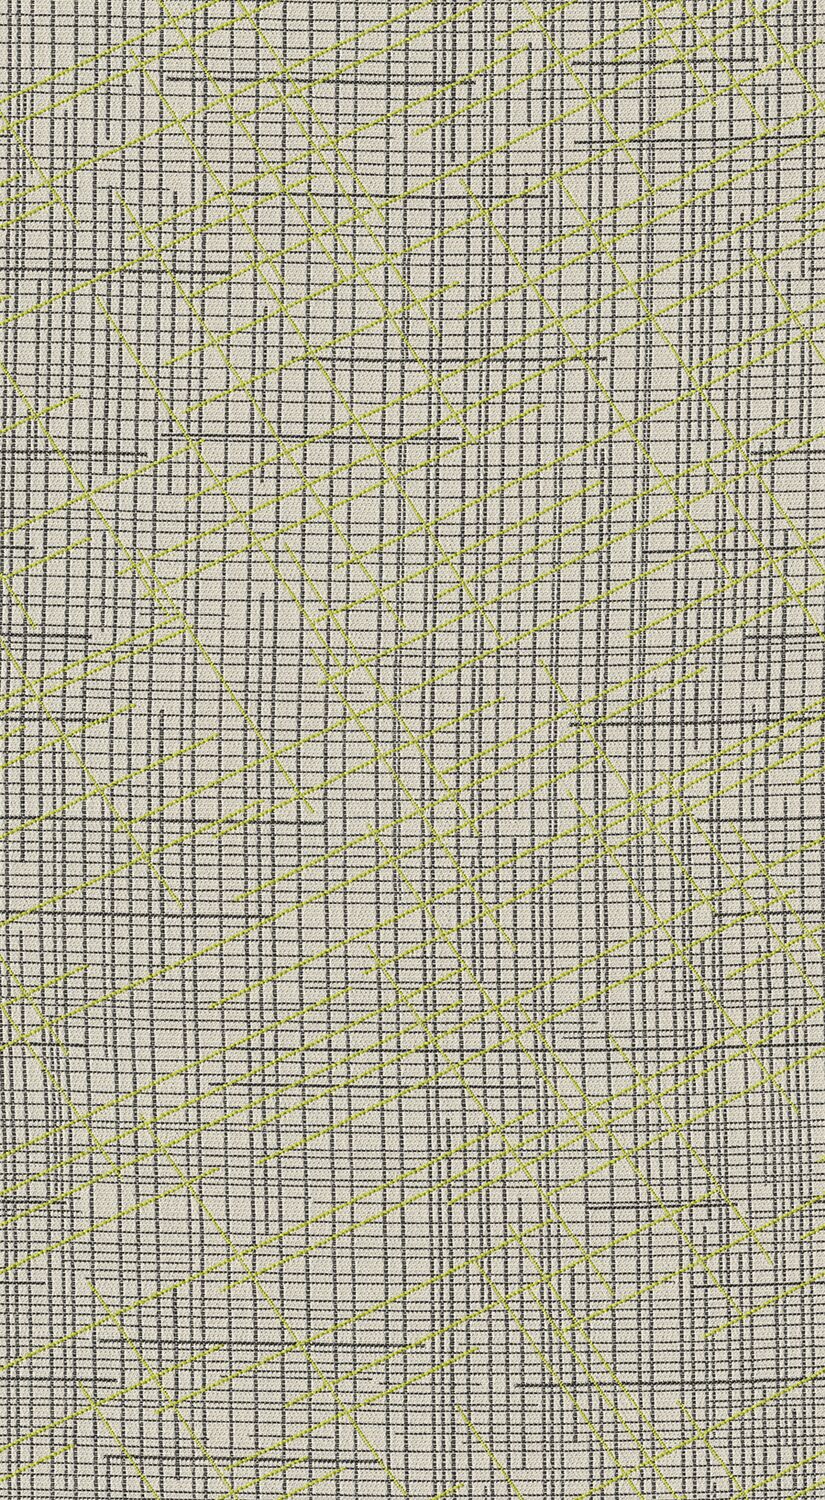 Intraweb - Coaxial - 2002 - 05 - Half Yard Tileable Swatches